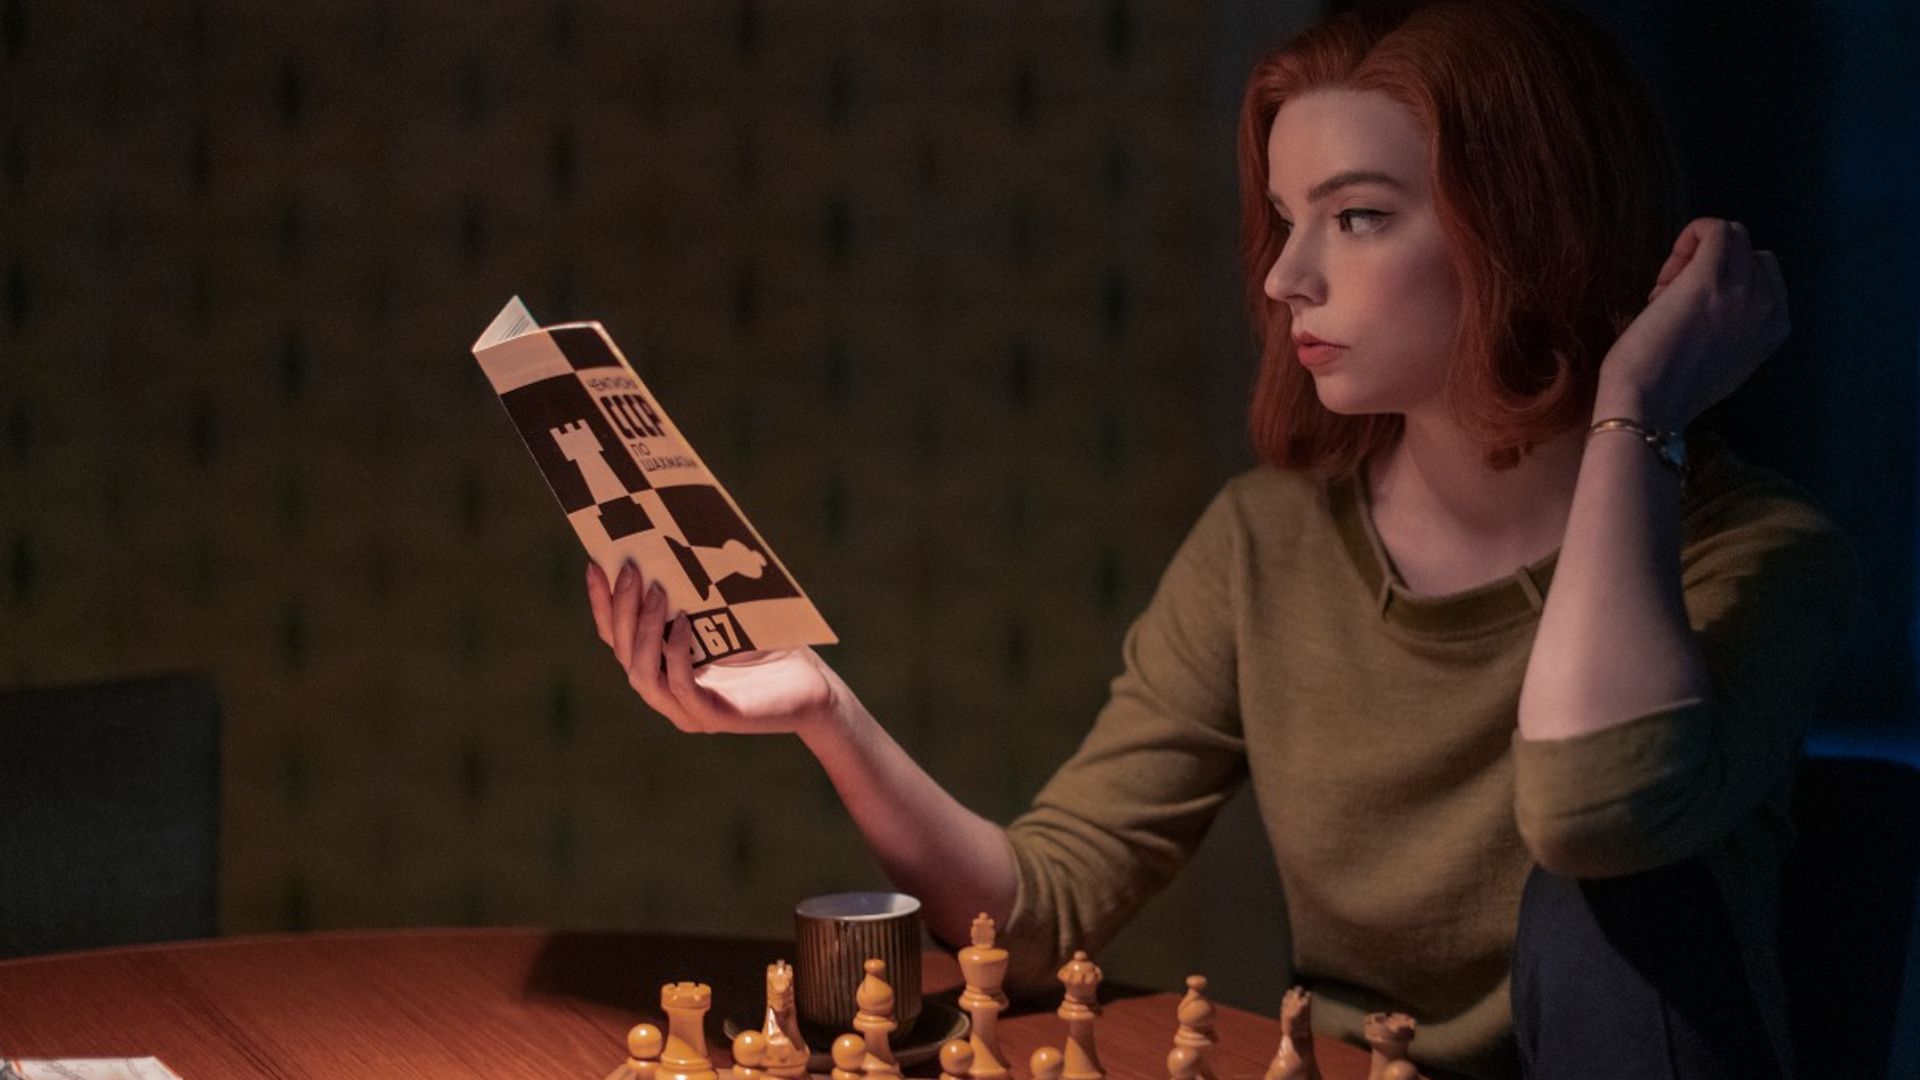 The Queen's Gambit Season 2 CAN Work (Not With Anya Taylor-Joy)